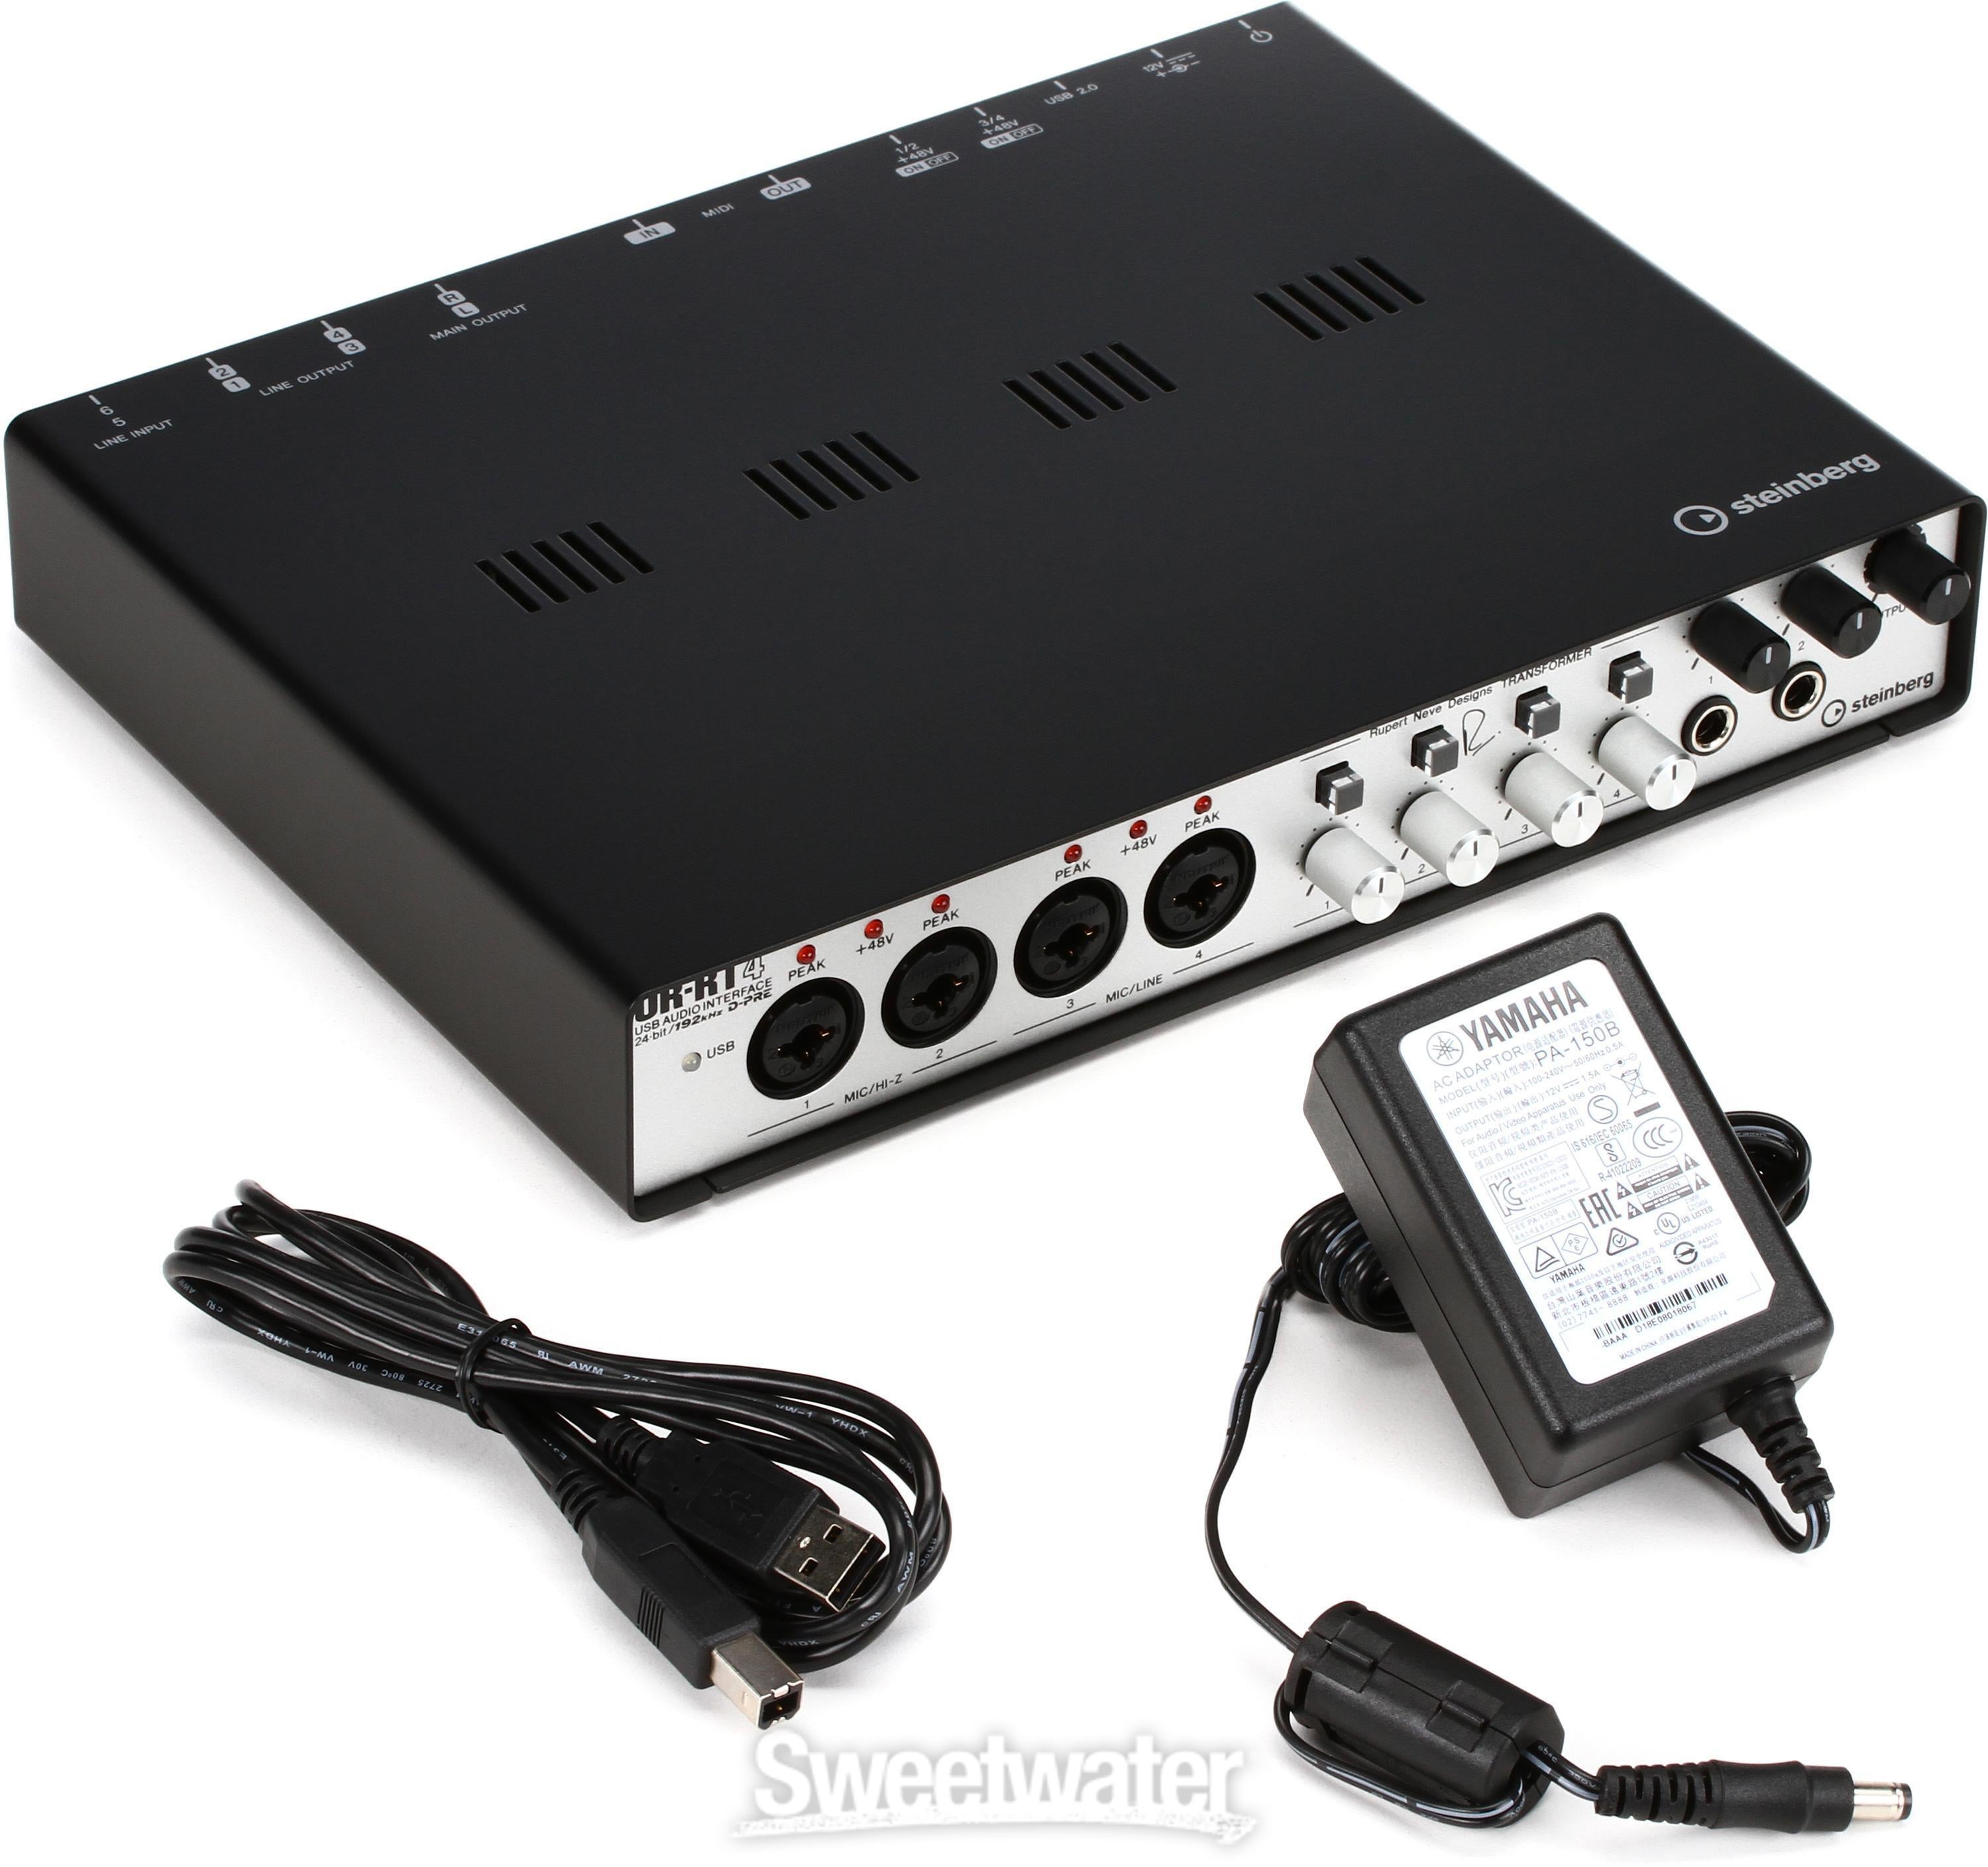 Steinberg UR-RT4 USB Audio Interface with 4 Rupert Neve Transformers |  Sweetwater